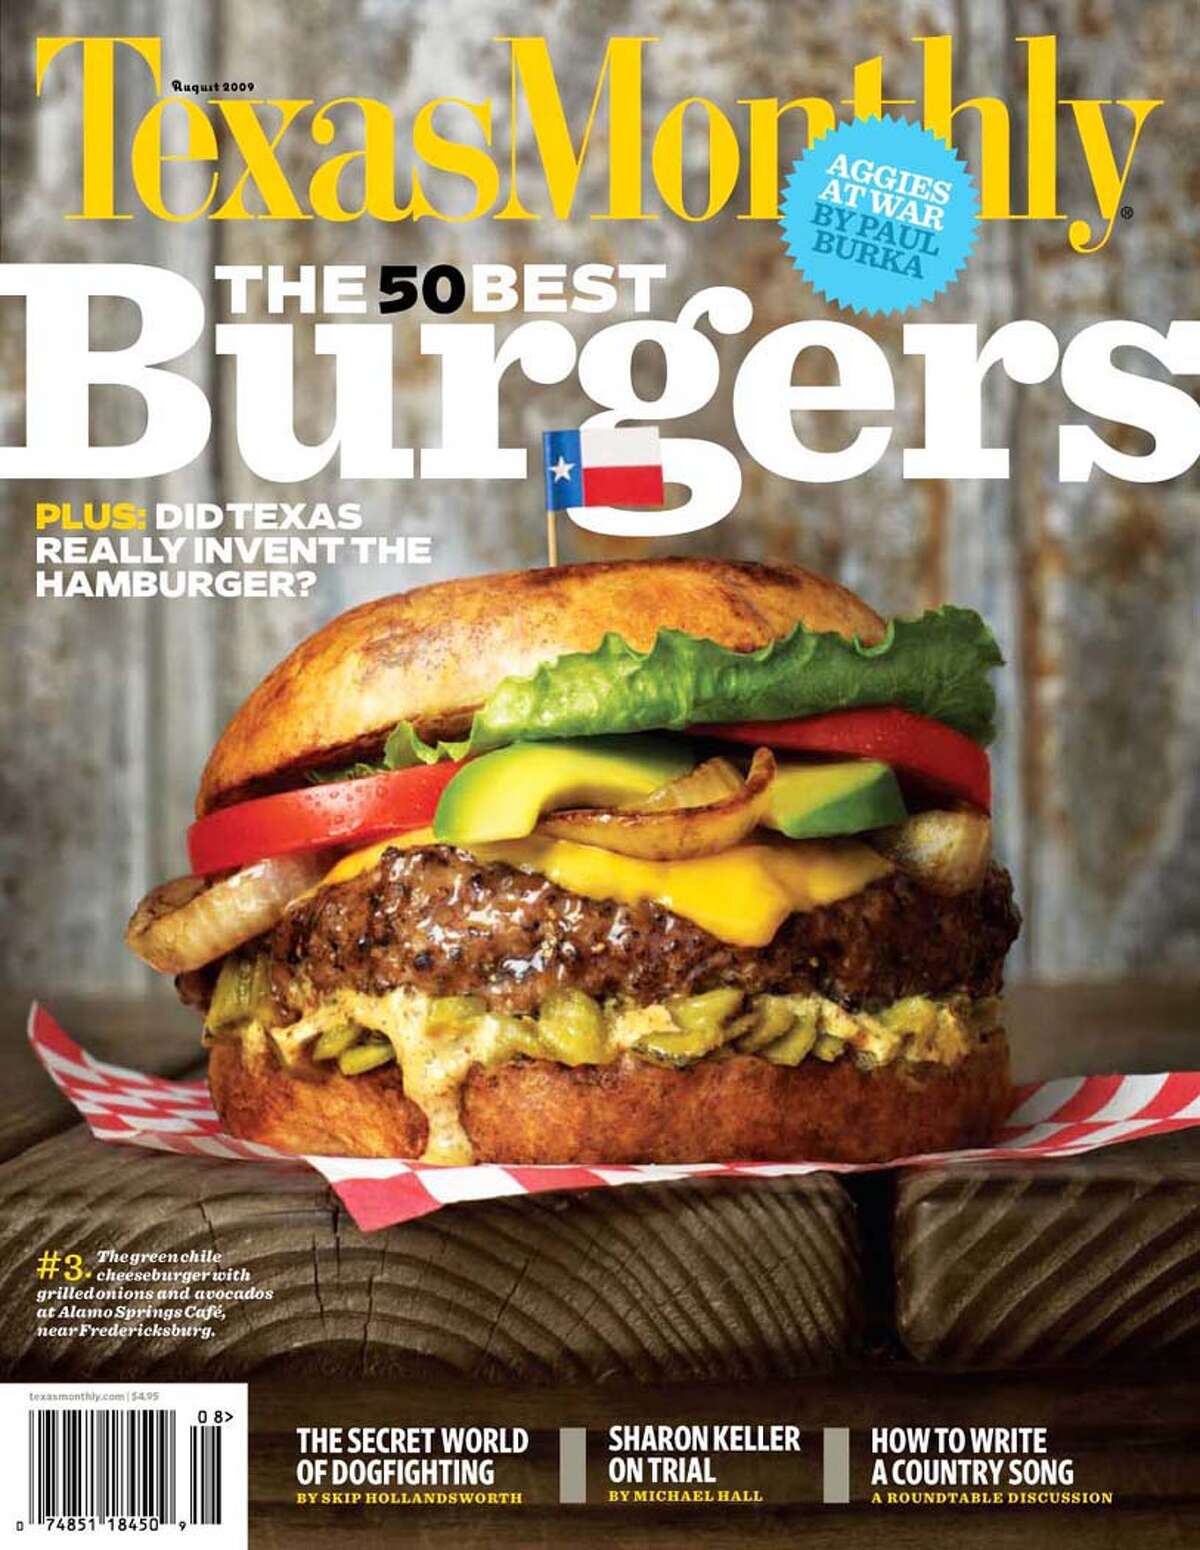 MAGAZINE COVER - Texas Monthly cover of August issue listing the 50 best burgers in Texas. Credit: Texas Monthly